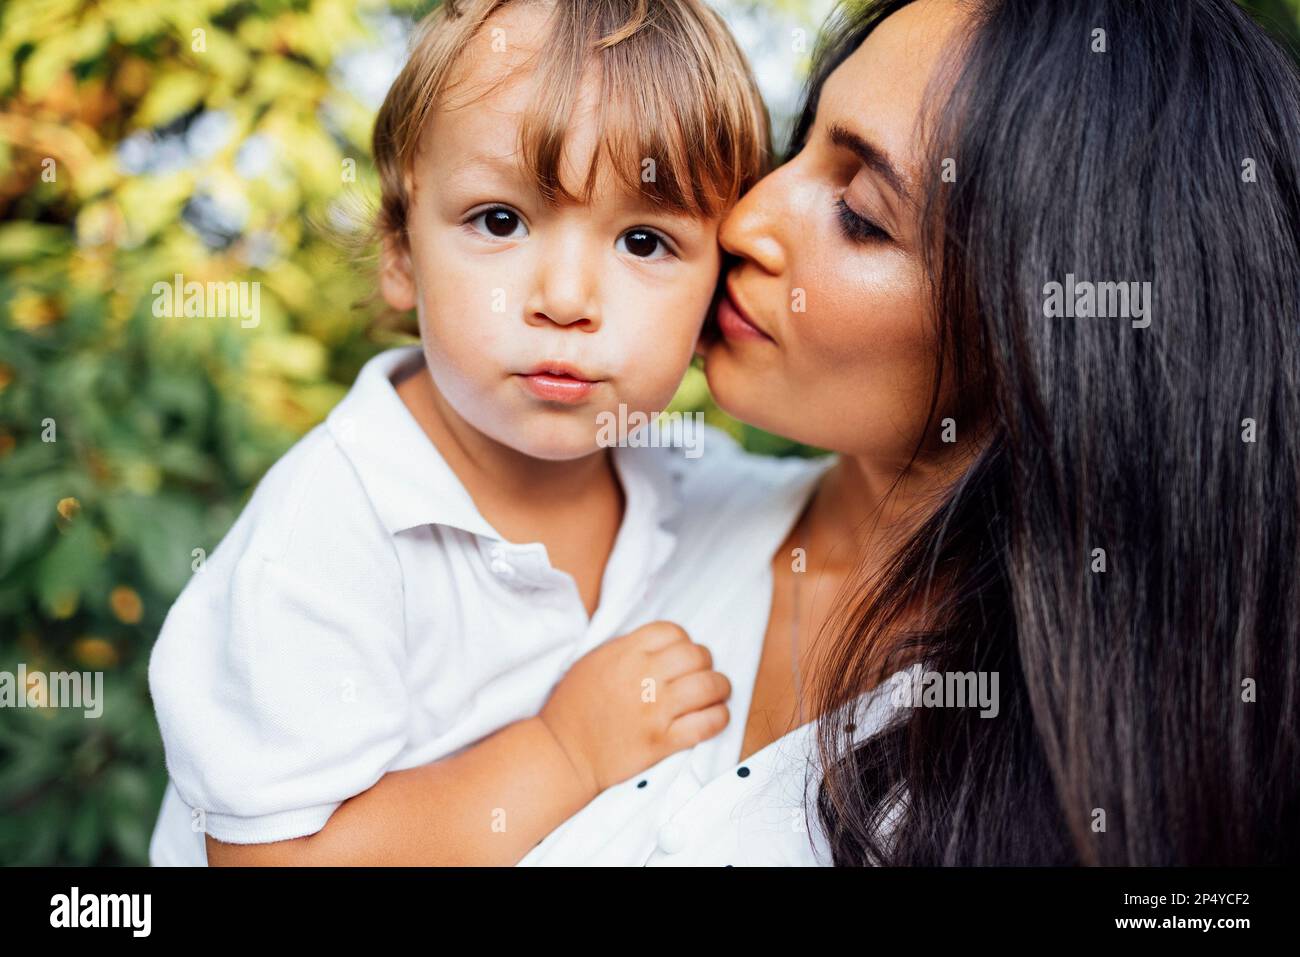 Lovely Portrait Of A Beautiful Mother Kissing Her Little Son Close Up Of A Young Brunette